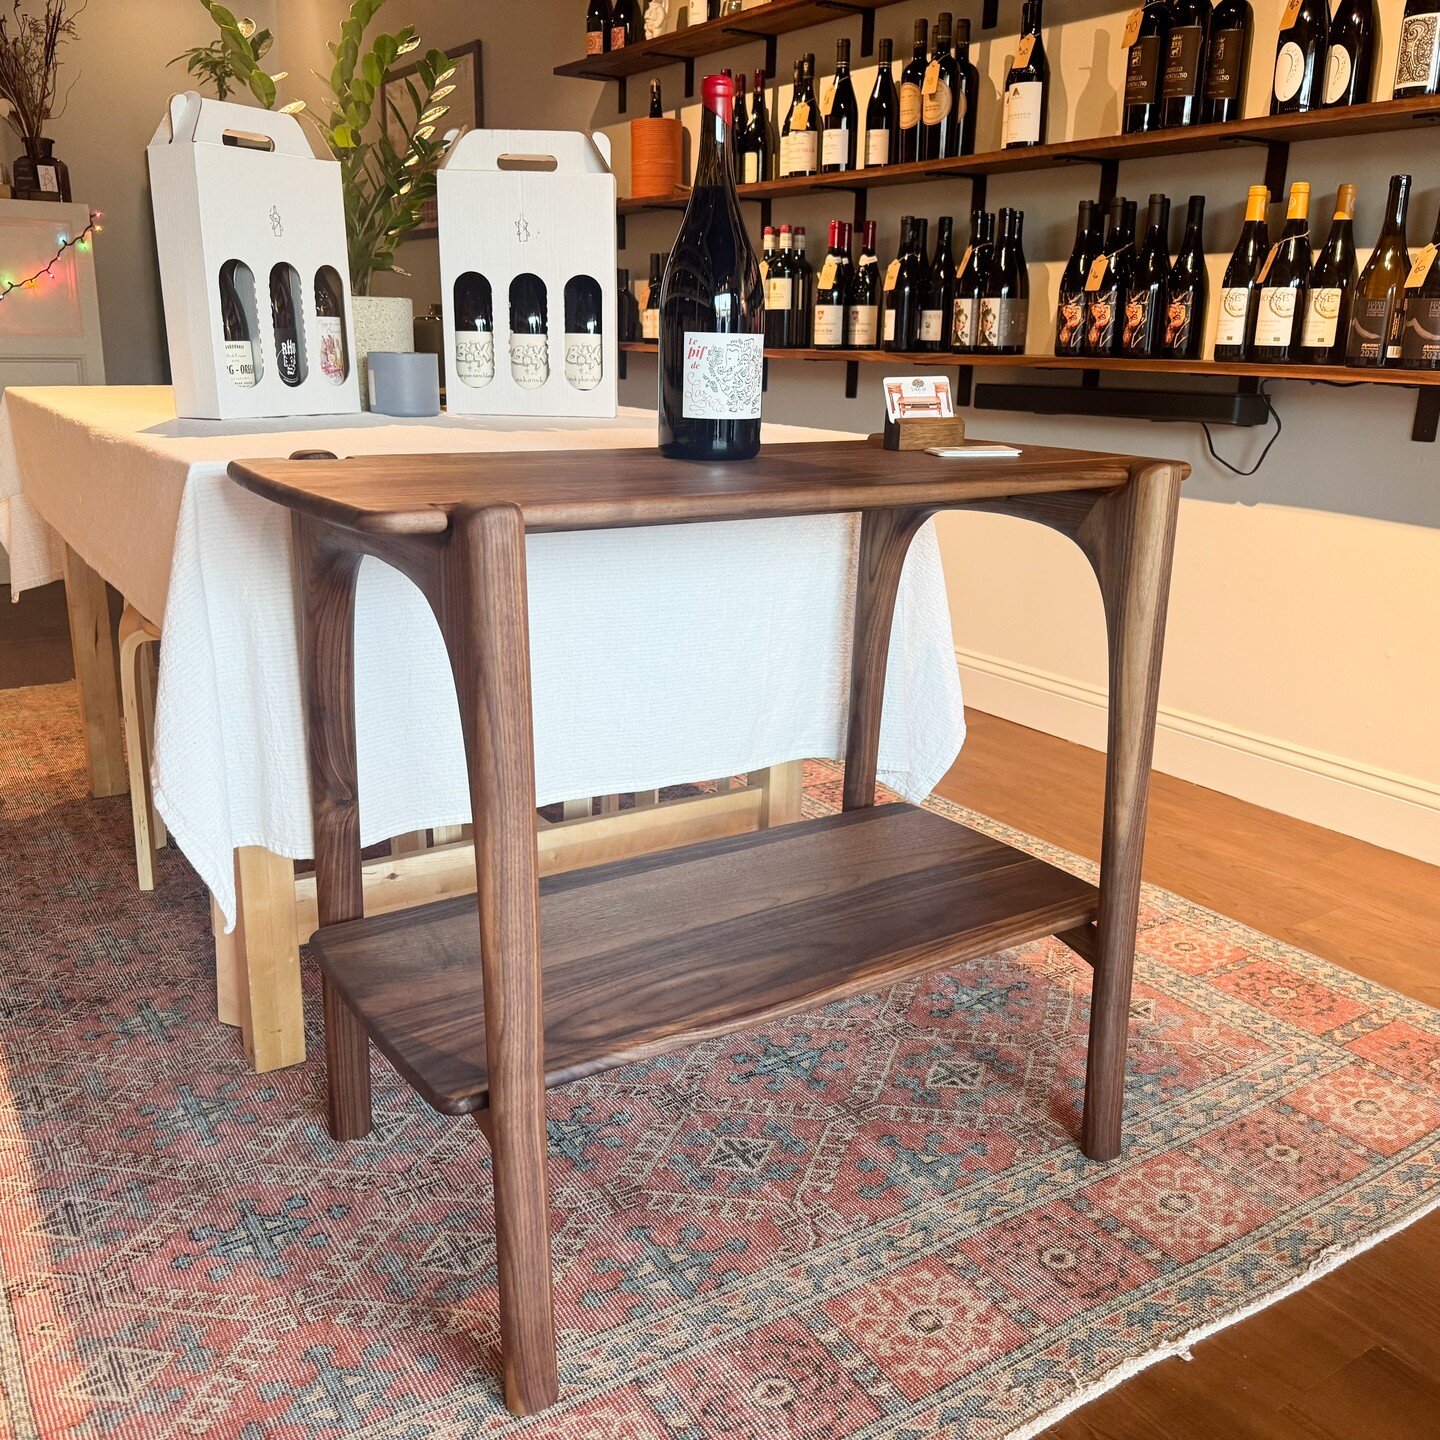 Friends, I am so excited to announce that my newest table is being showcased at @satellitebottleshop in Dedham! Please stop by to see the table and try some amazing natural wines.

I first learned about the awesomeness of natural wines from Action Br